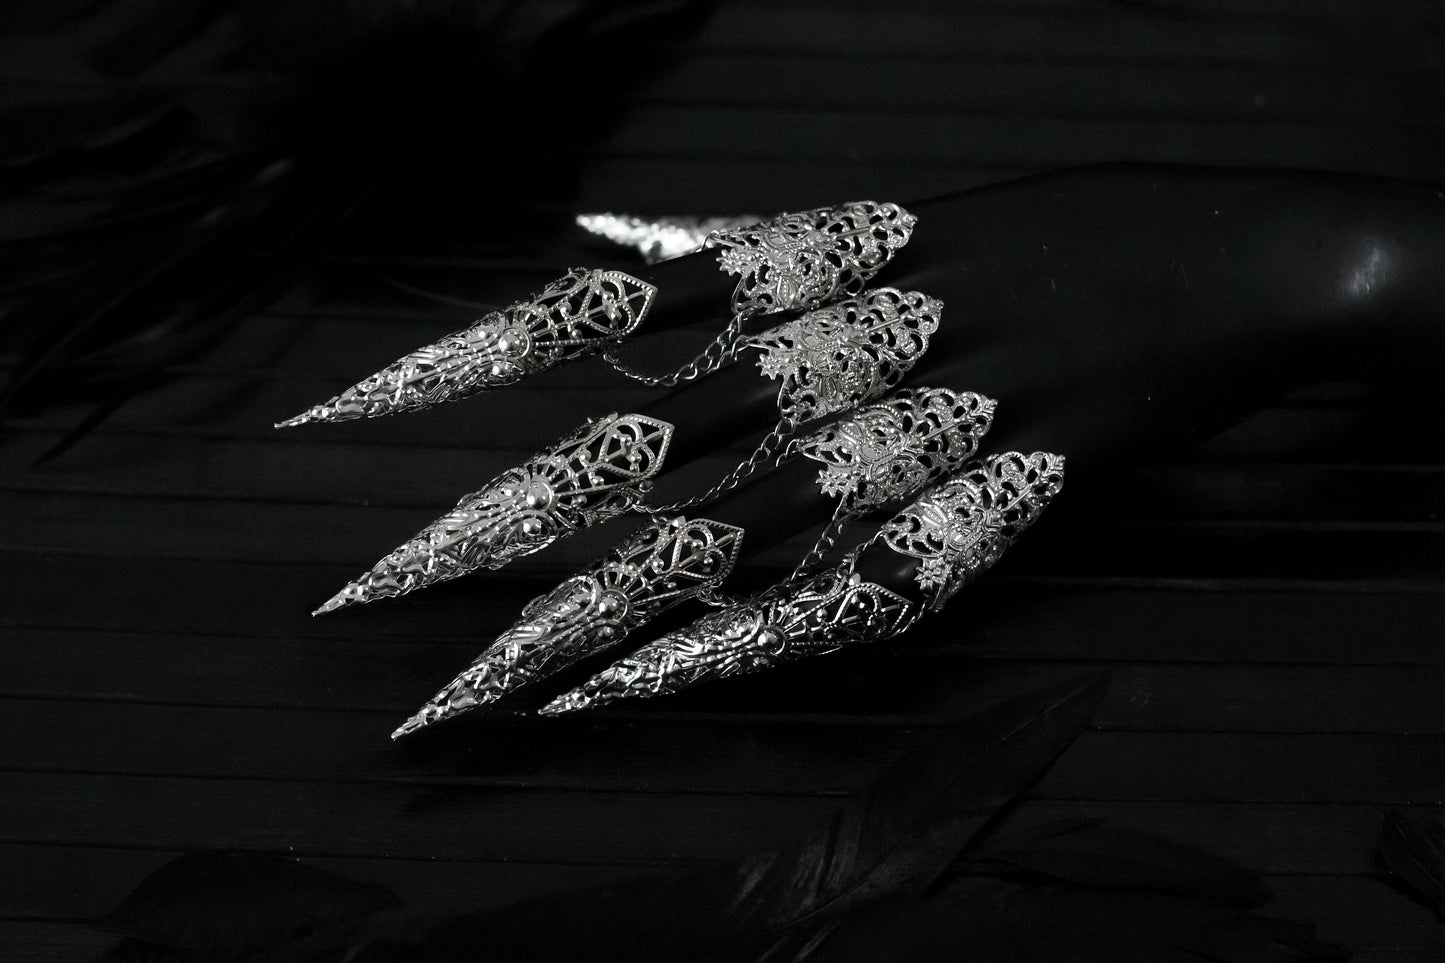 Captured in a dimly lit setting, a mannequin displaying a full set of Myril Jewels armor rings, each with elongated, ornate claws. This neo-goth inspired jewelry exudes dark-avantgarde flair, perfect for those with a passion for gothic and alternative styles. The claws are ideal for Halloween, embodying the essence of Gothic-chic, and make a bold statement for witchcore, whimsigoth, or minimal goth fashion. They’re also a striking addition to rave party attire and festival or drag queen jewels.